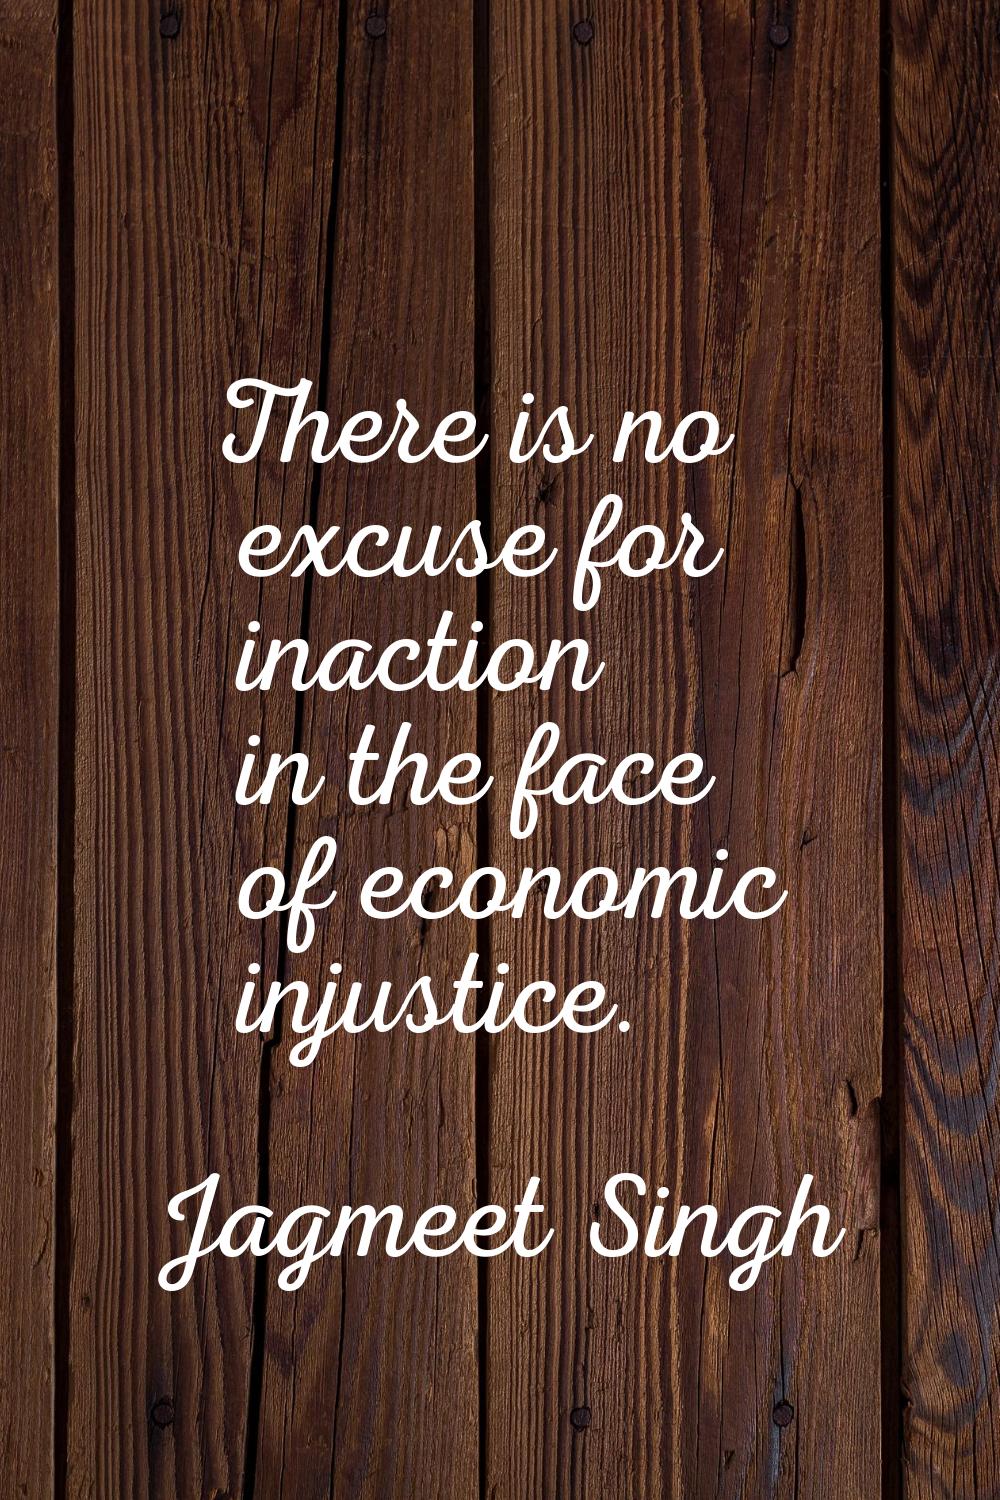 There is no excuse for inaction in the face of economic injustice.